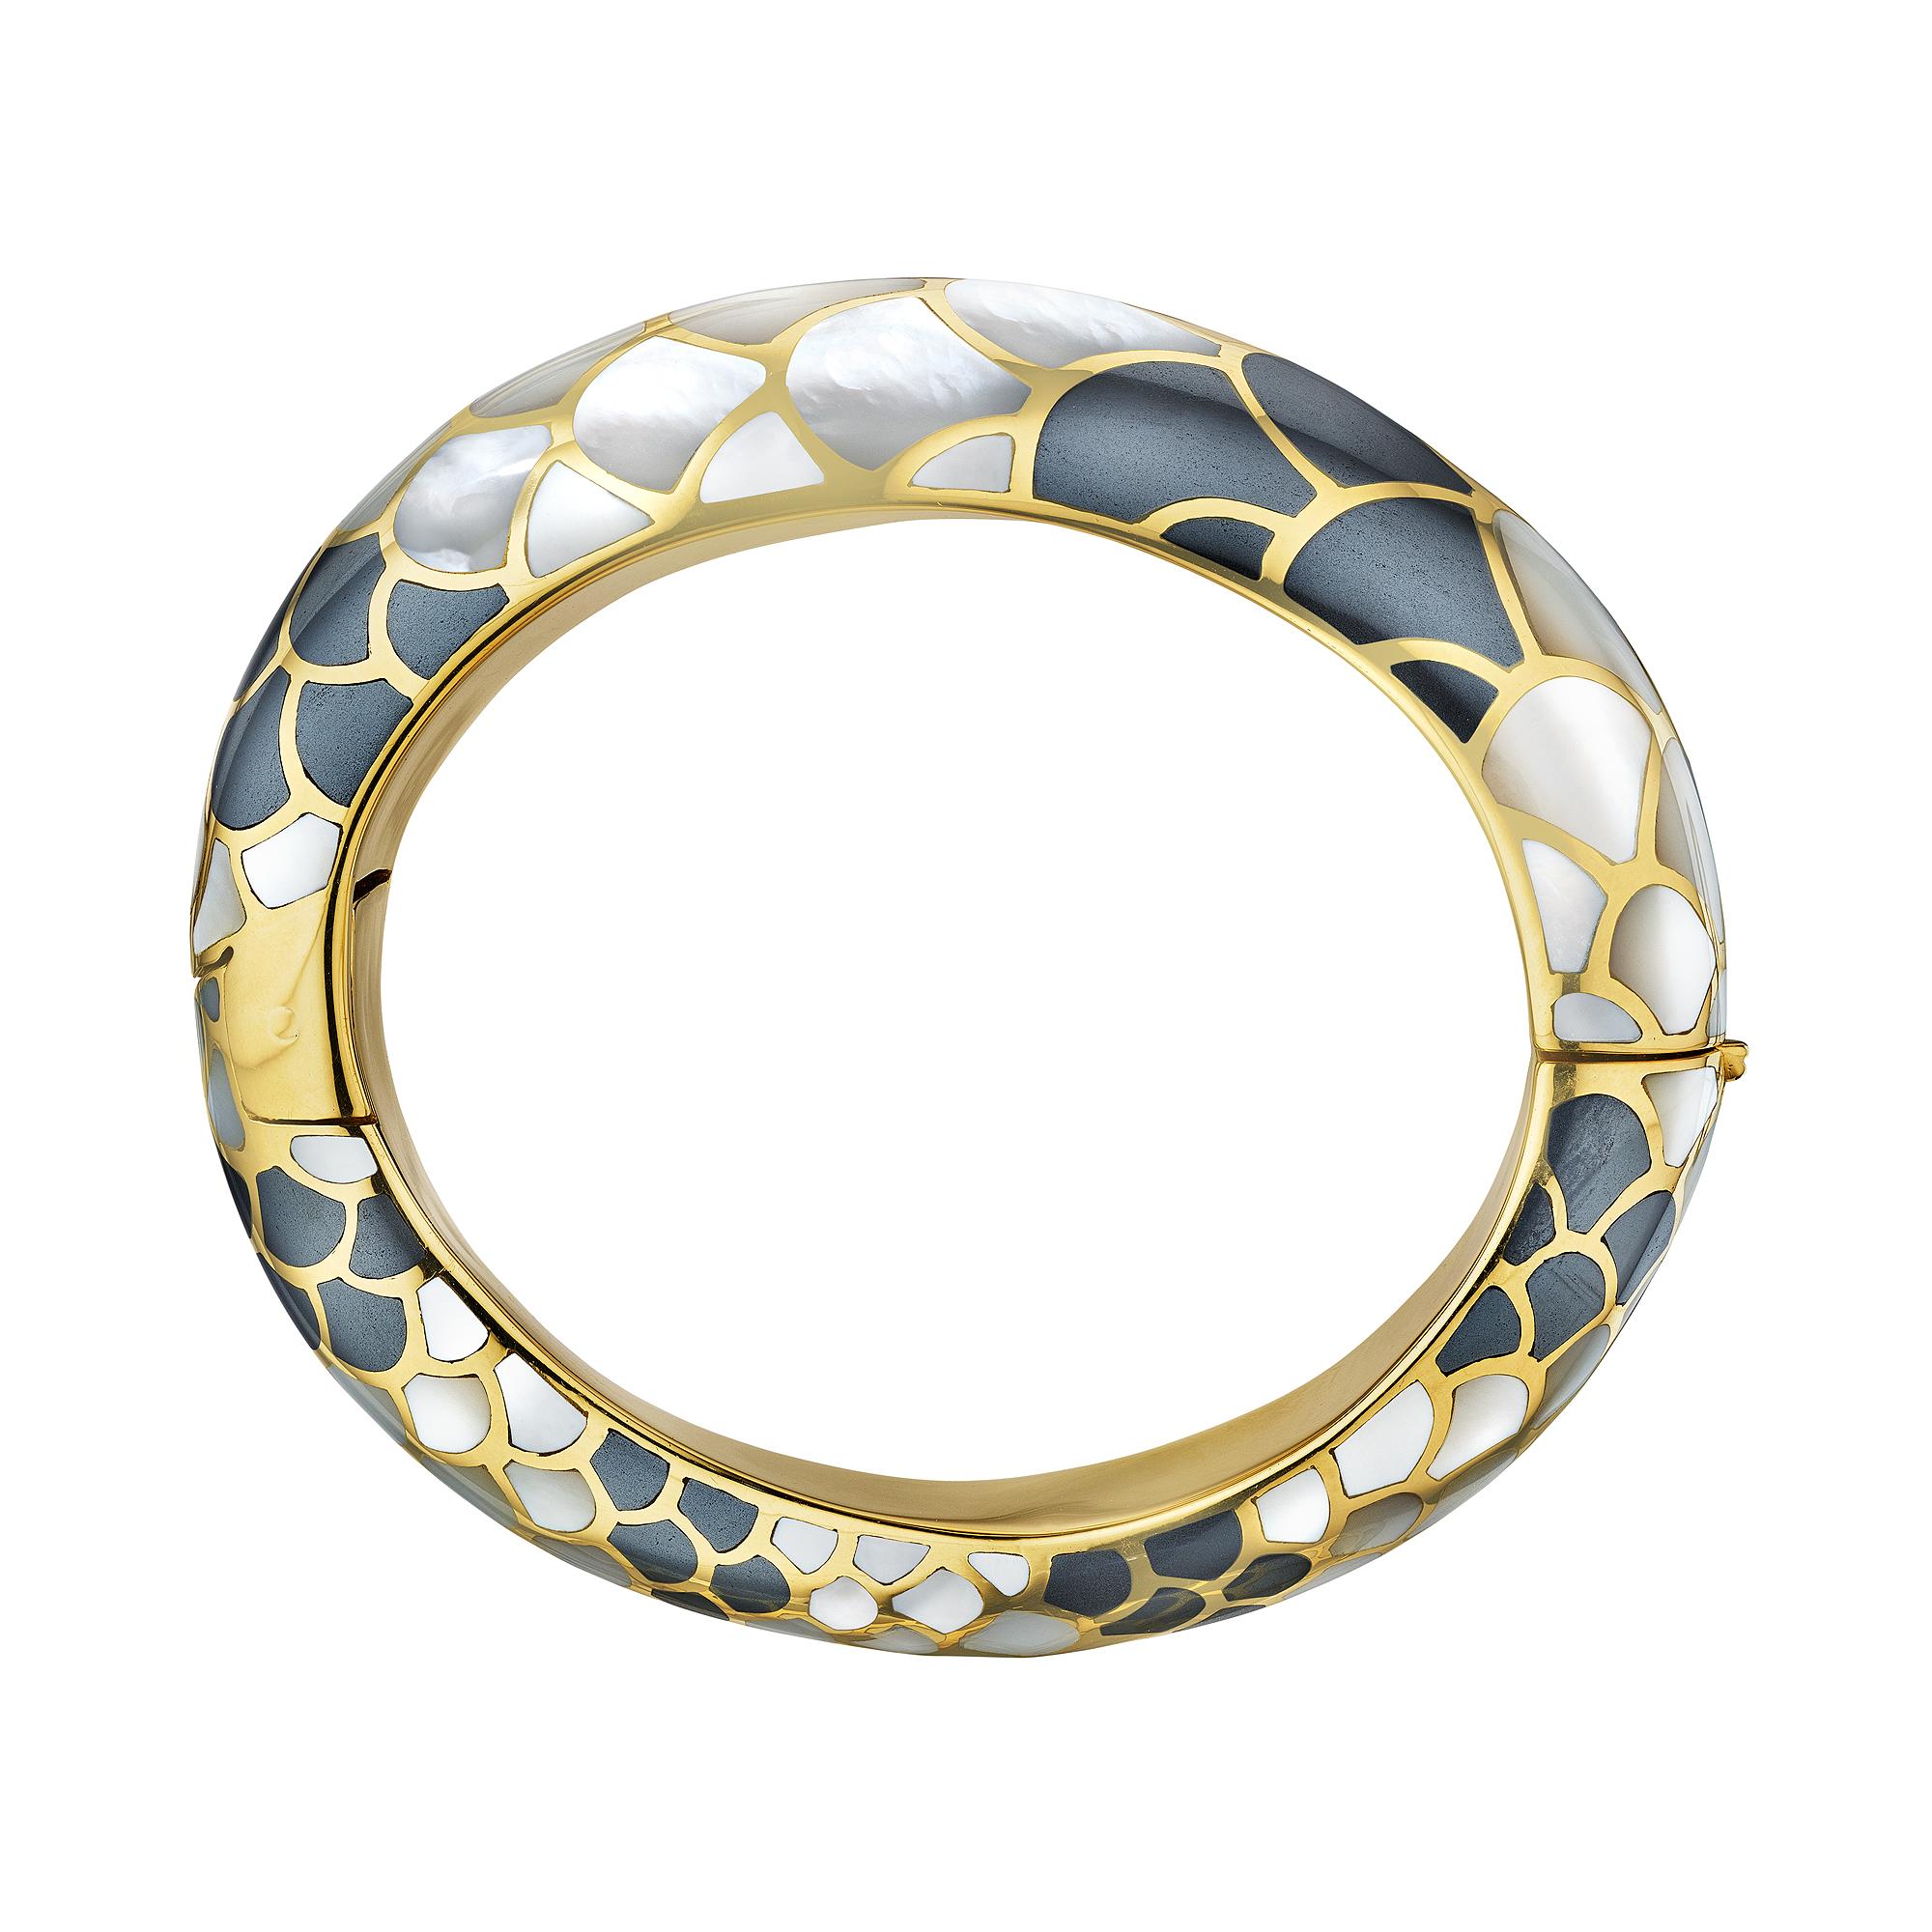 Mixed Cut Angela Cummings Mother-of-Pearl Hematite Gold Modernist Bangle Bracelet For Sale